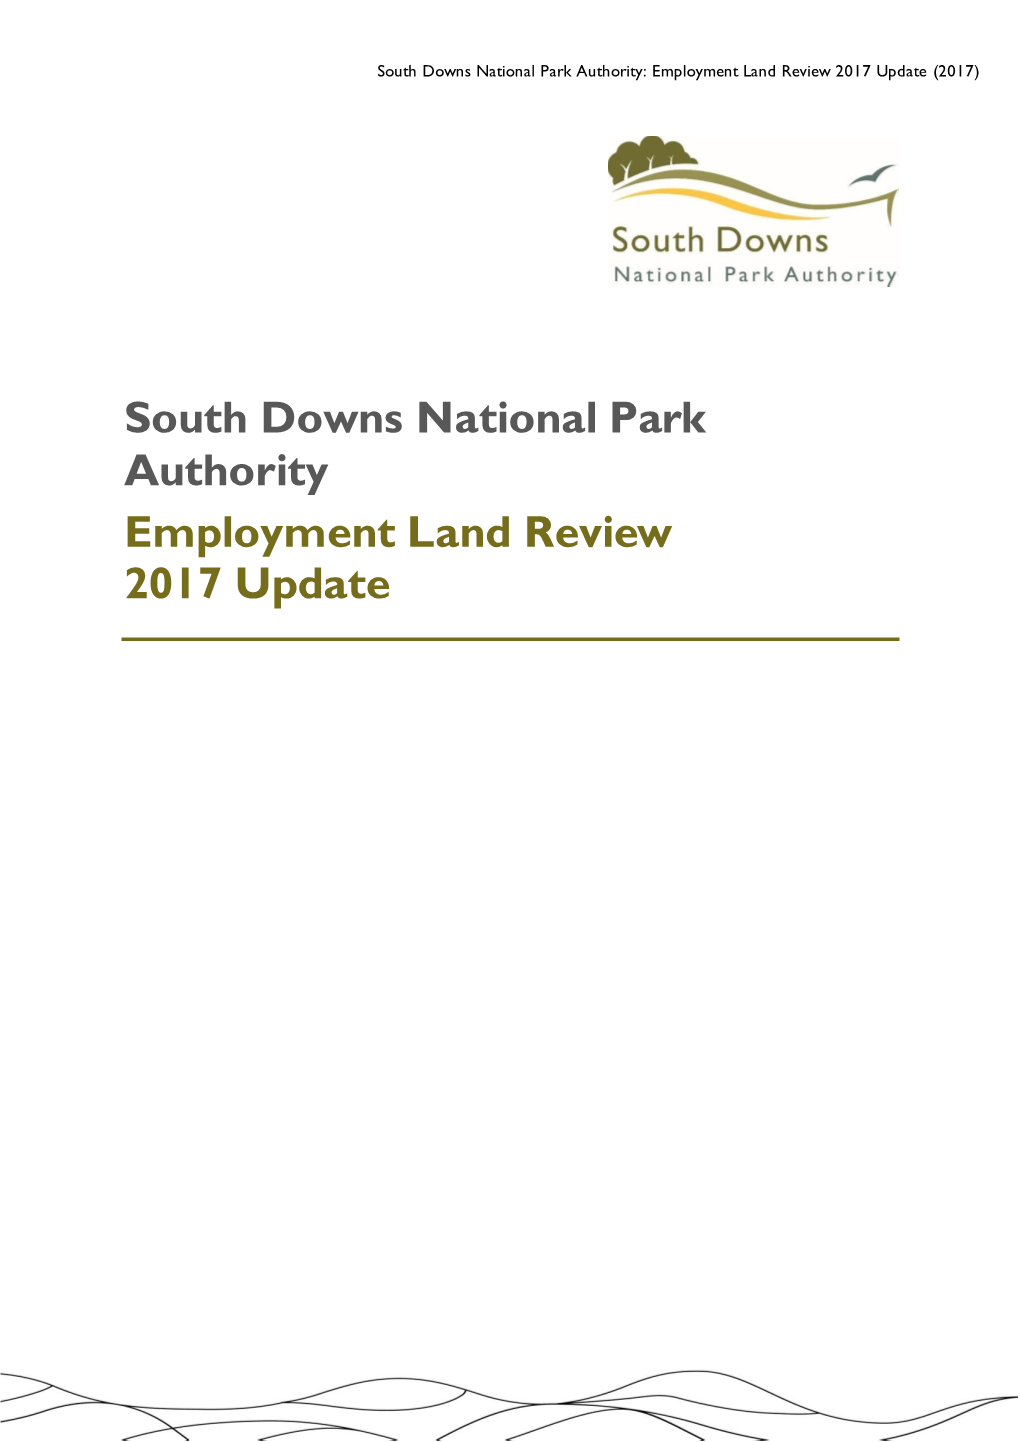 South Downs National Park Authority Employment Land Review 2017 Update